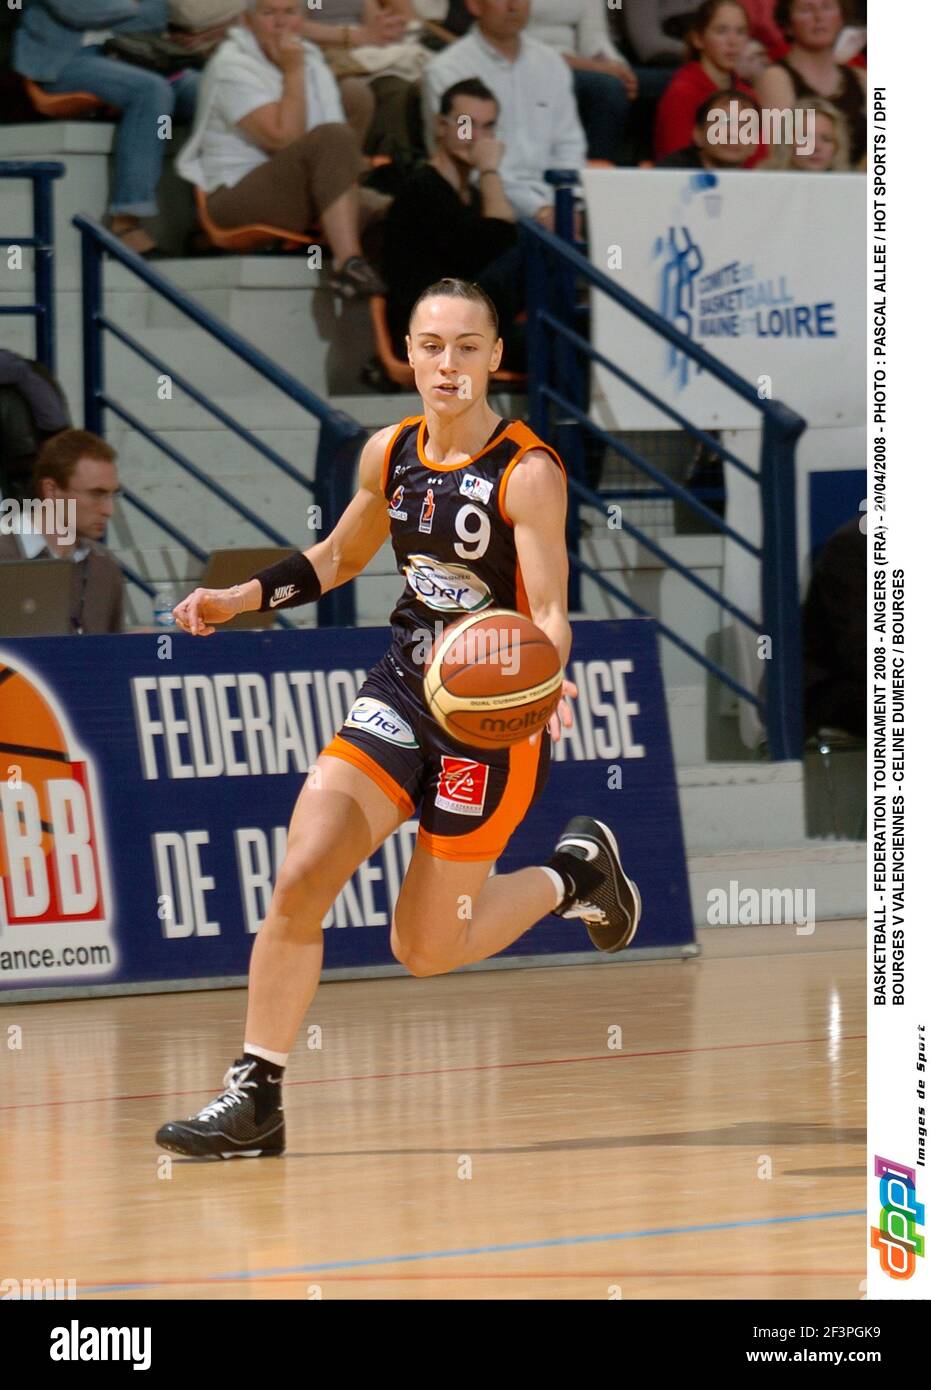 BASKETBALL - FEDERATION TOURNAMENT 2008 - ANGERS (FRA) - 20/04/2008 - PHOTO  : PASCAL ALLEE / HOT SPORTS / DPPI BOURGES V VALENCIENNES - CELINE DUMERC /  BOURGES Stock Photo - Alamy